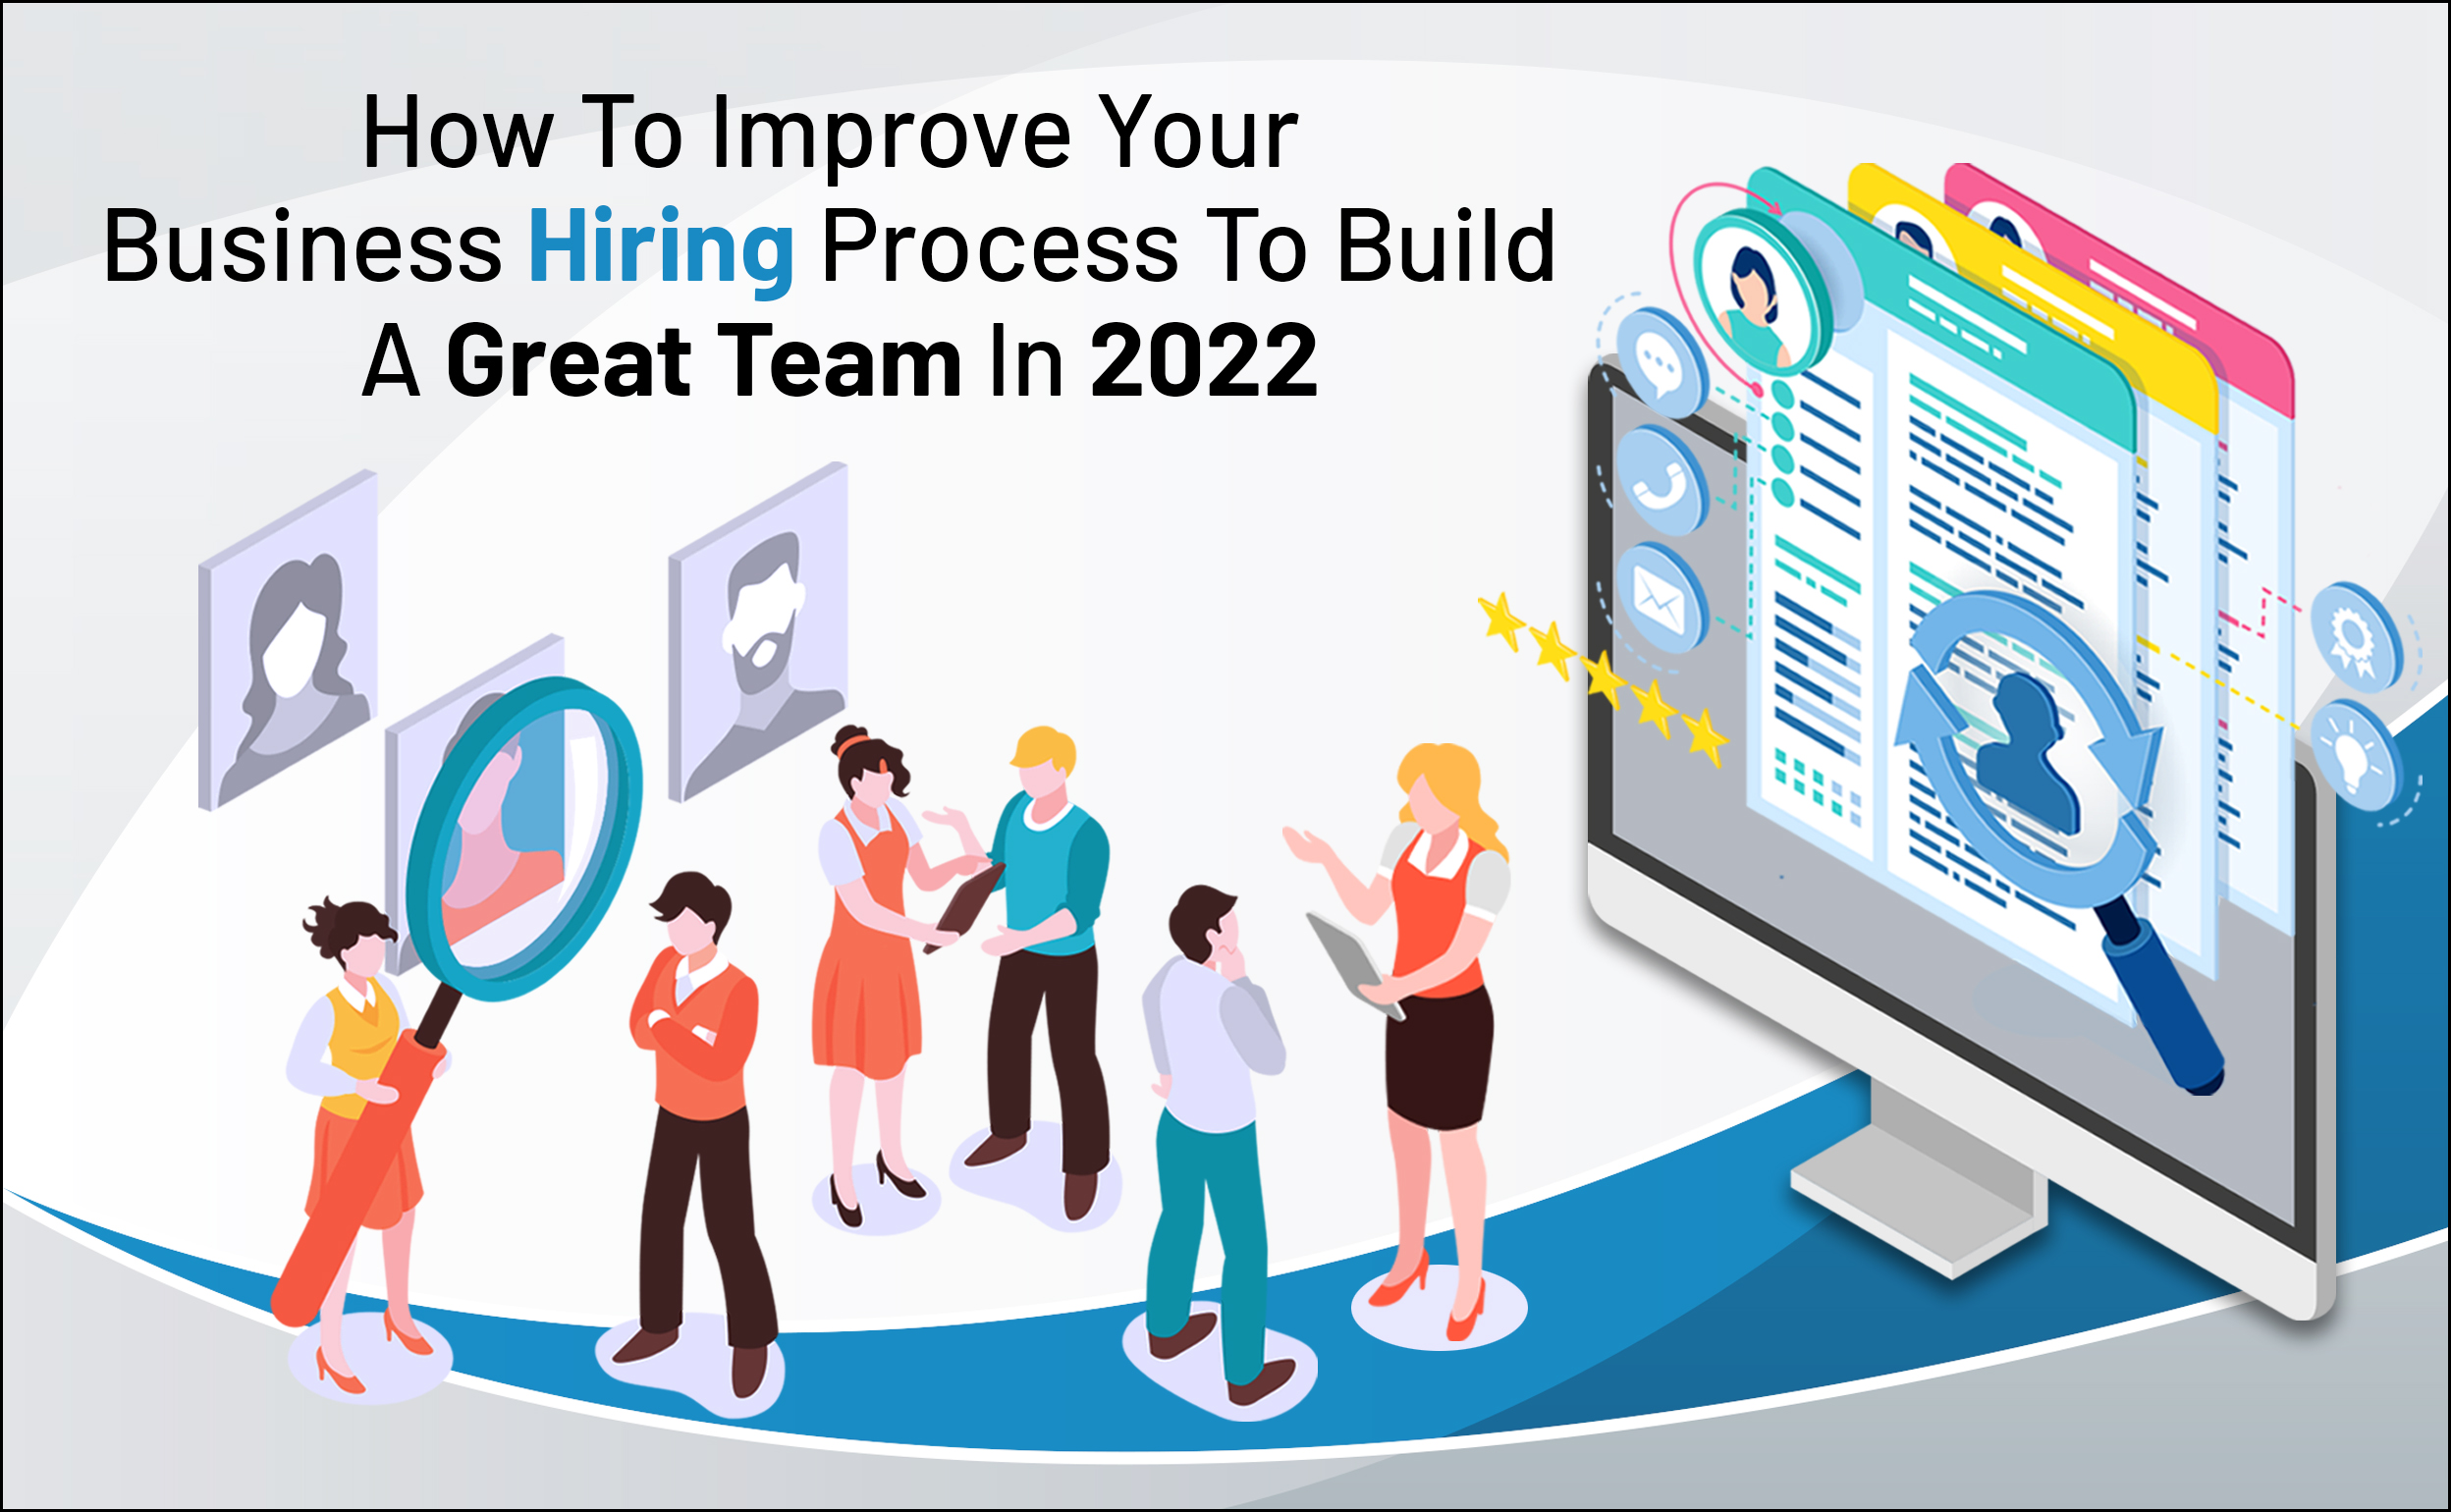 How to improve your business hiring process to build a great team in 2022